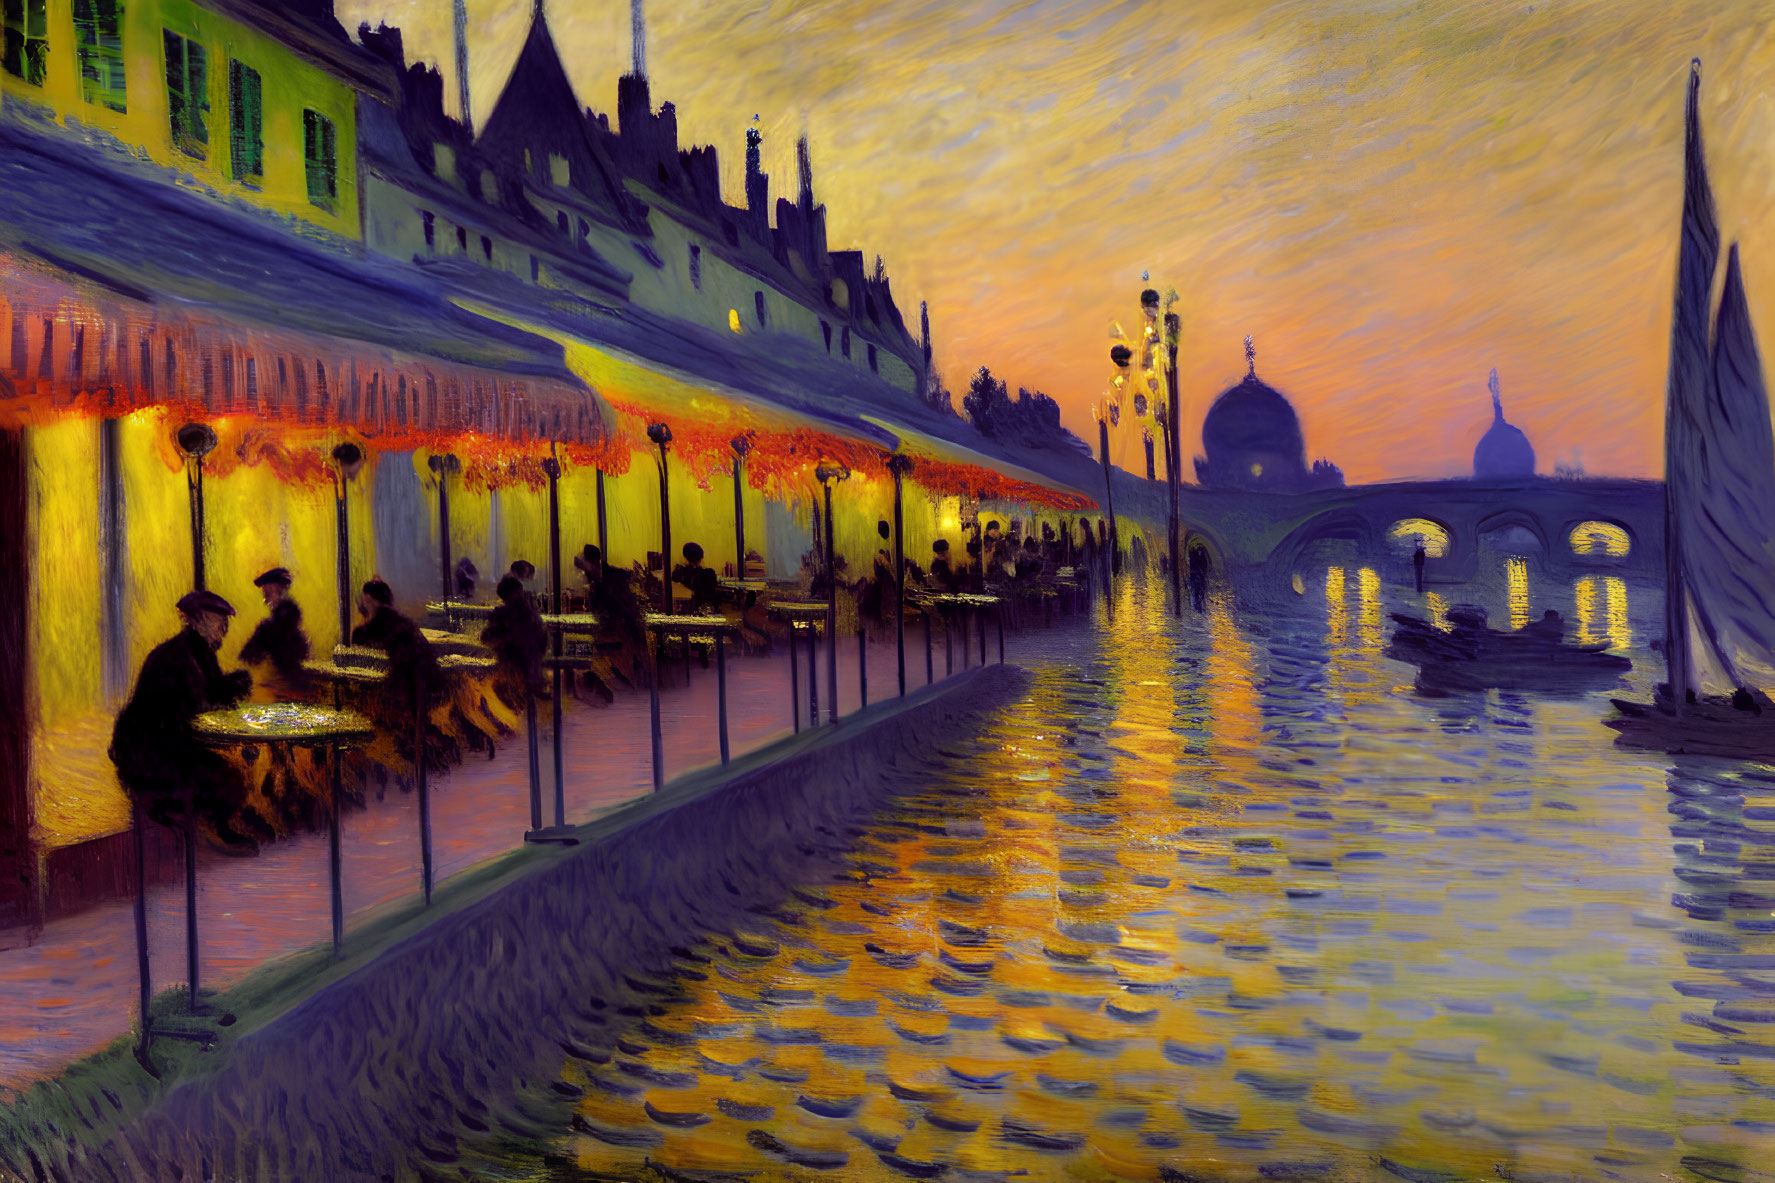 Impressionist-style painting of people dining by river at twilight